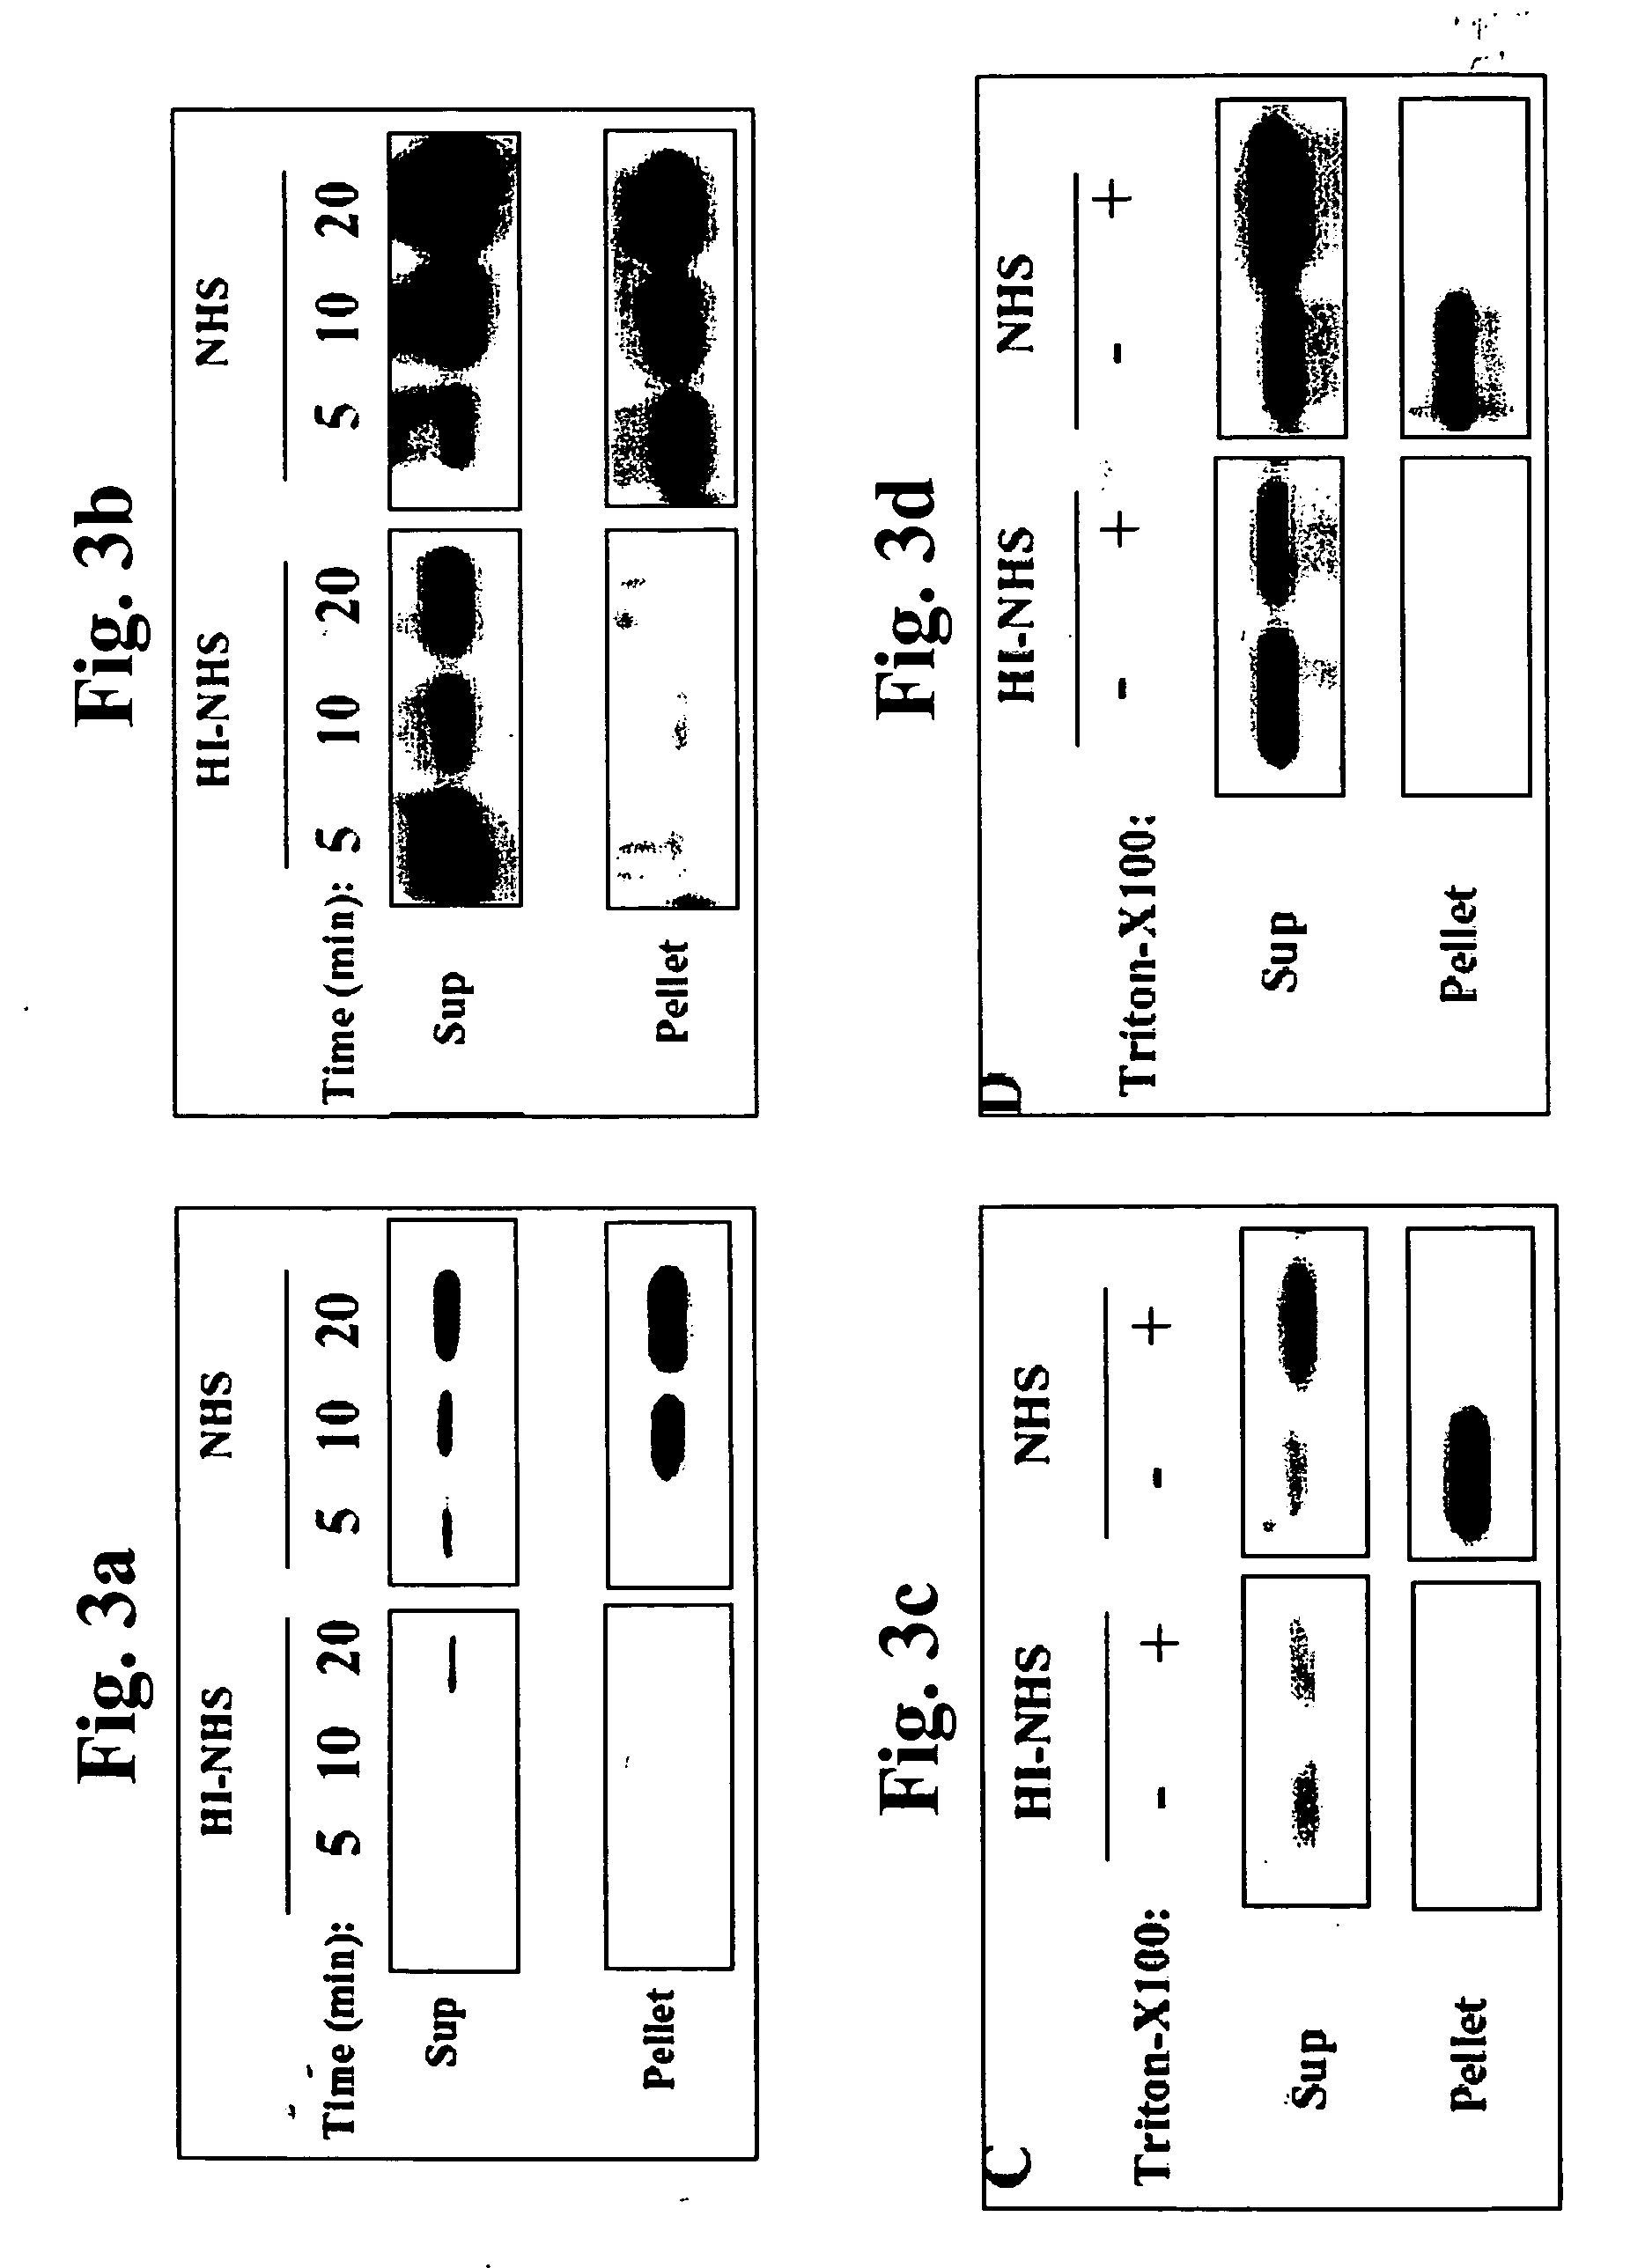 Article of manufacture and method for disease treatment